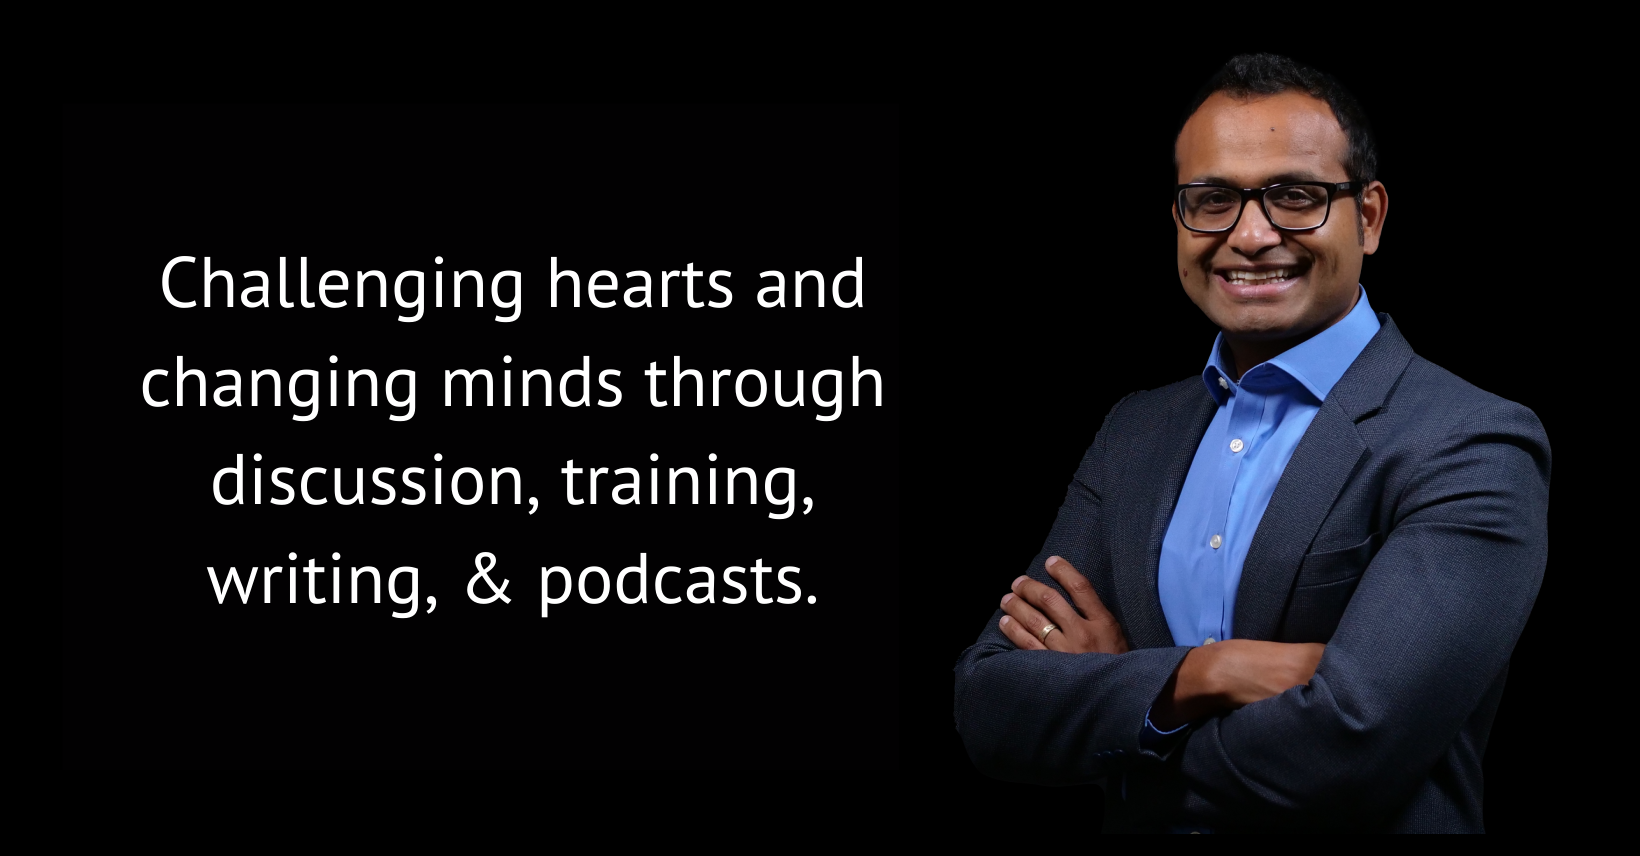 Dr. Alfonse Javed is Challenging hearts and changing minds through discussion, training, writing, & podcasts..